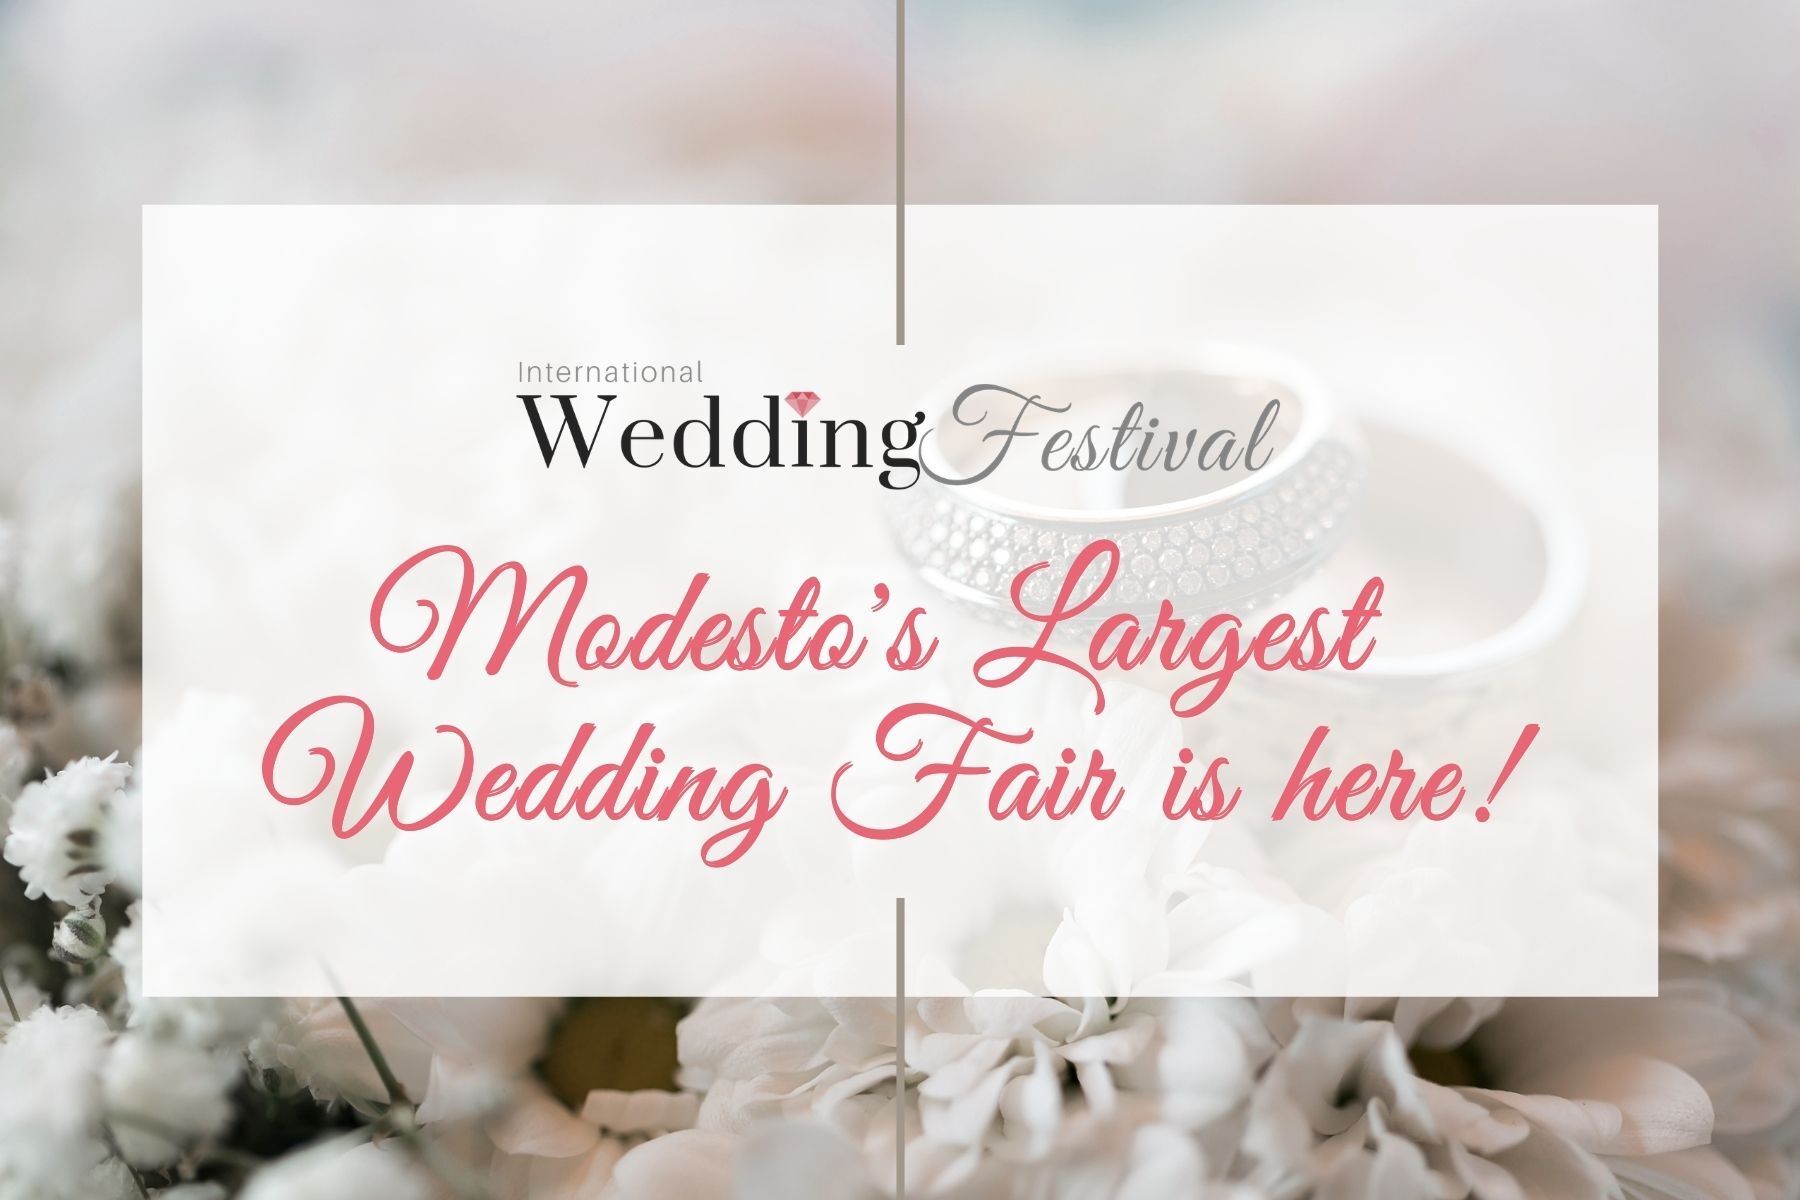 modesto's largest bridal show and wedding expo at modesto centre plaza